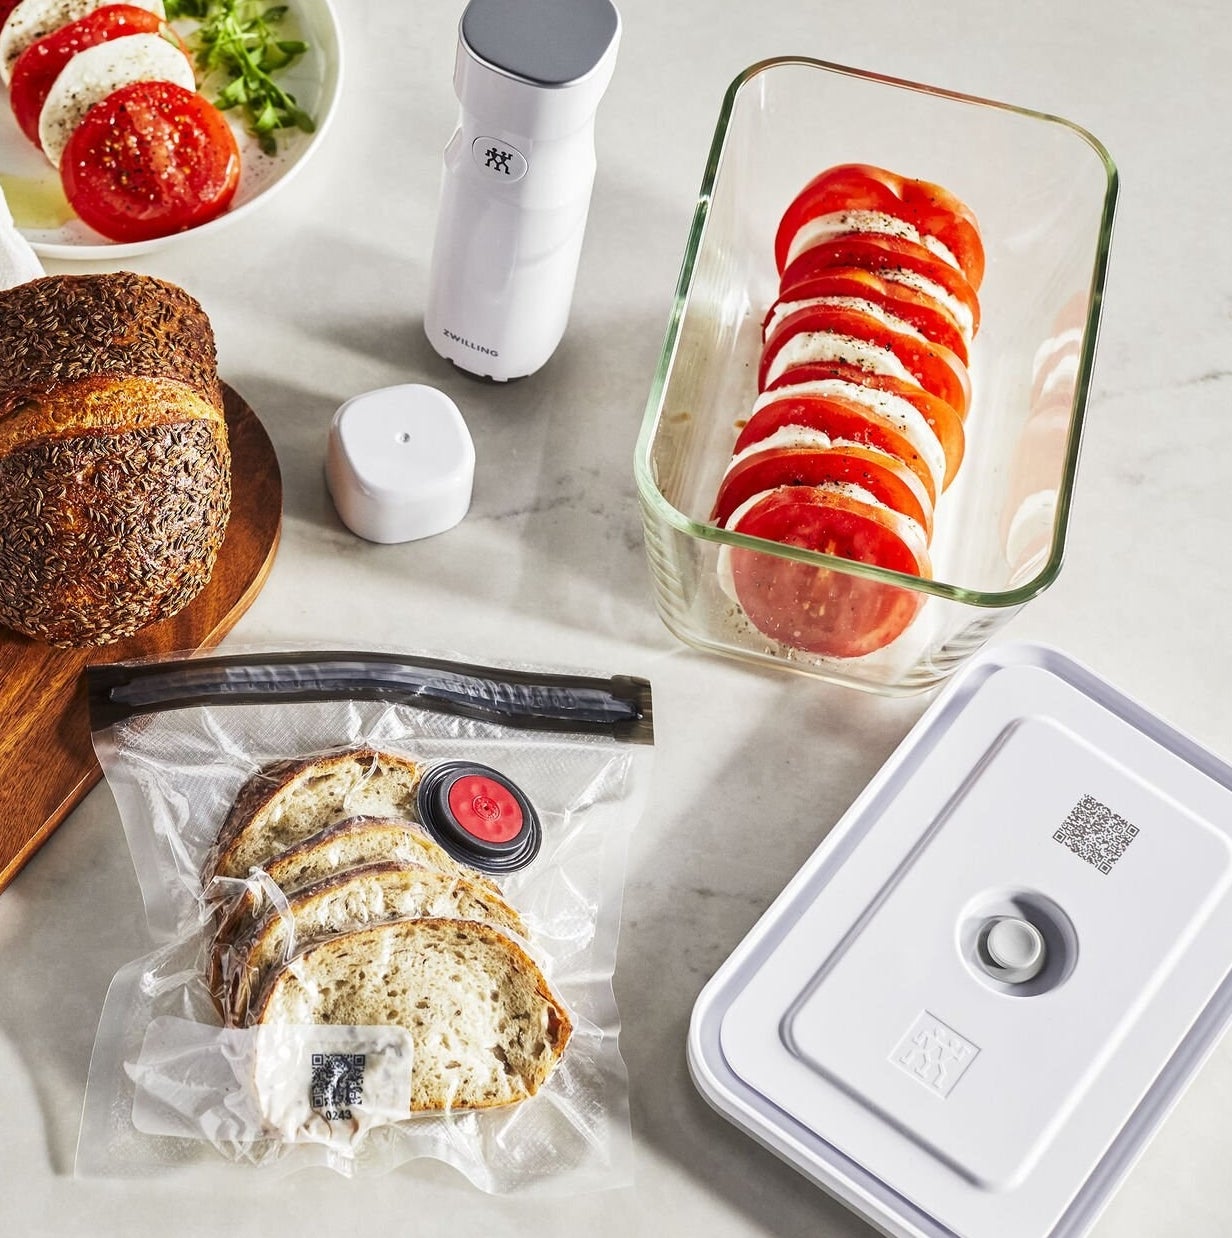 A bag with bread vacuum sealed, a container with tomato and mozzarella, and the small vacuum pump